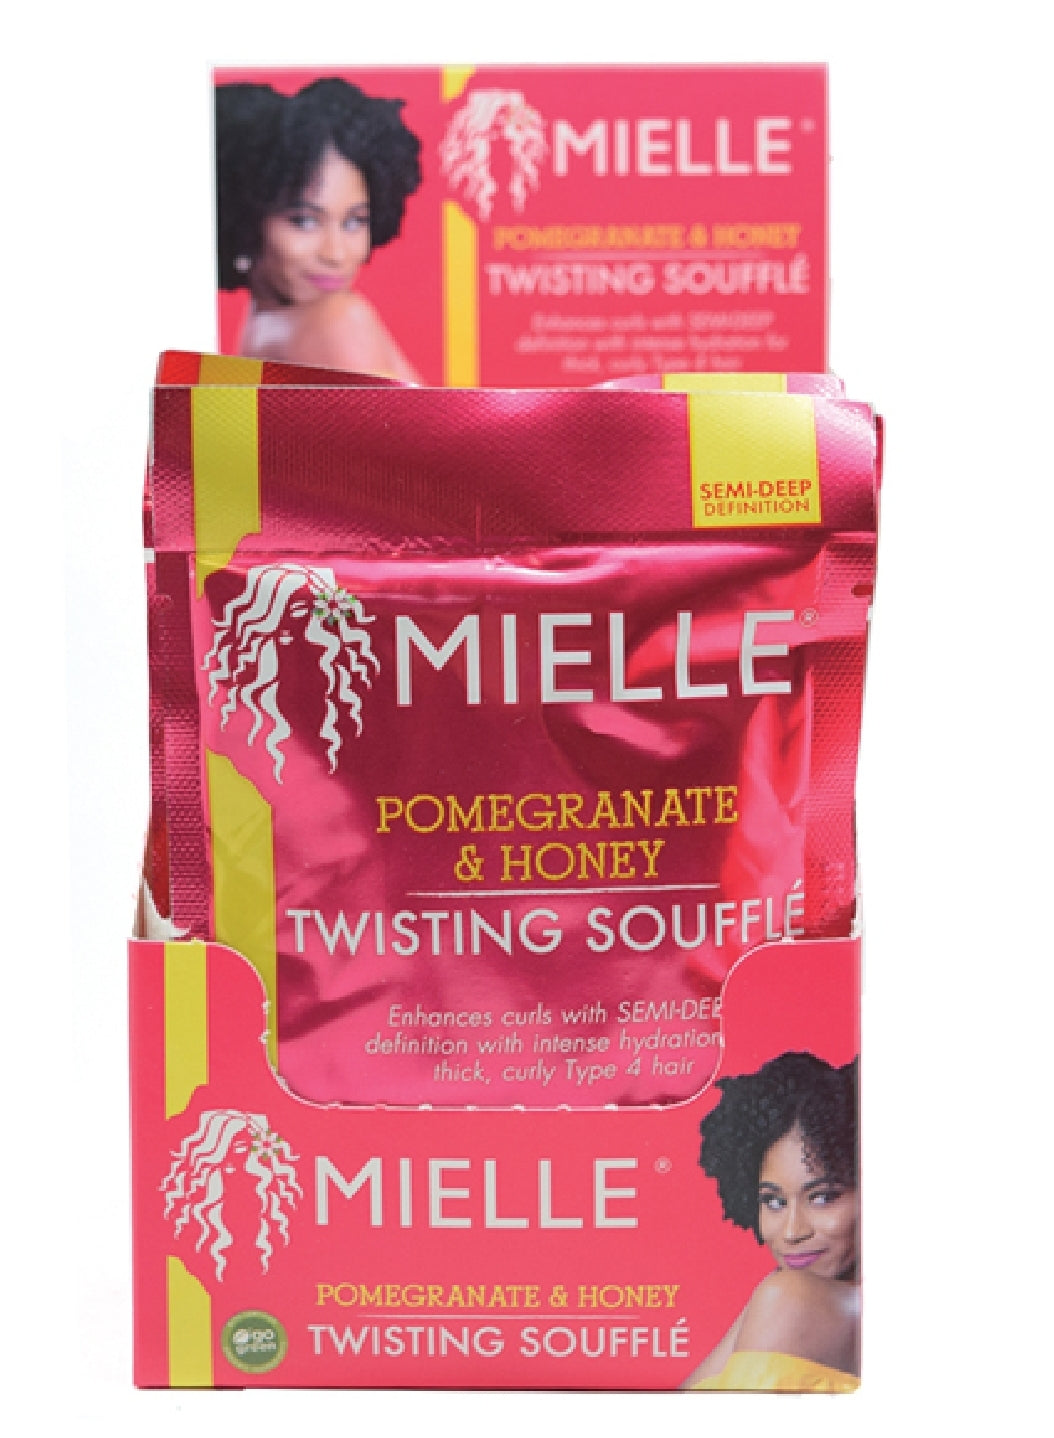 MIELLE- POMEGRANATE & HONEY TWISTING SOUFFLE PACKET